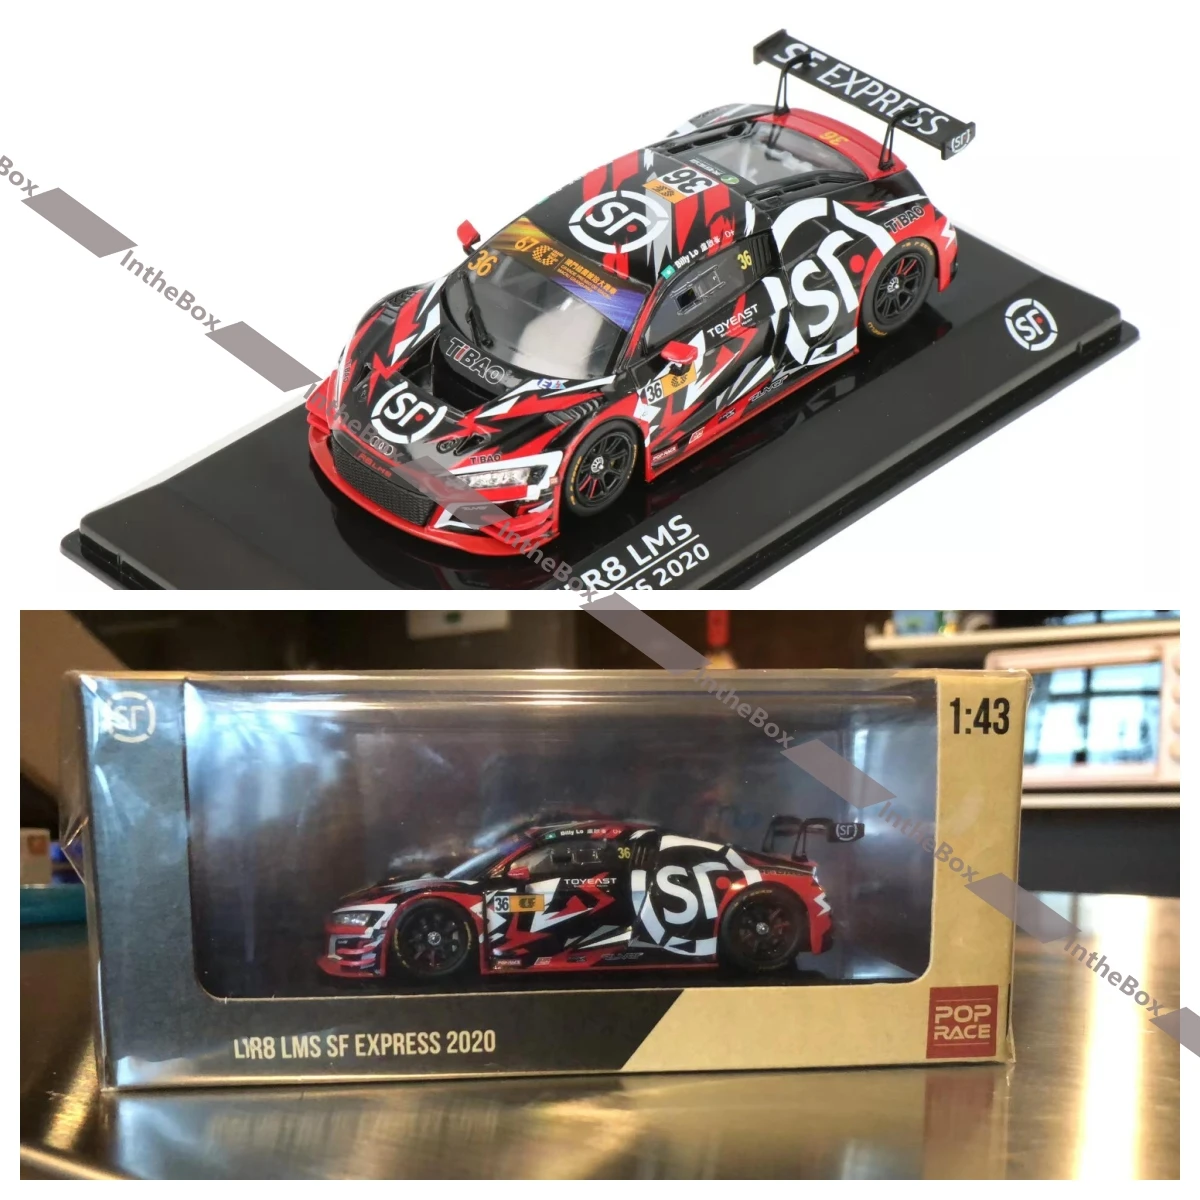 

POPRACE 1/43 R8 LMS Pop Race 1:43 2020 Billy Lo SF Express Diecast Car Model Gift Model Car Collection Limited Edition Hobby Toy